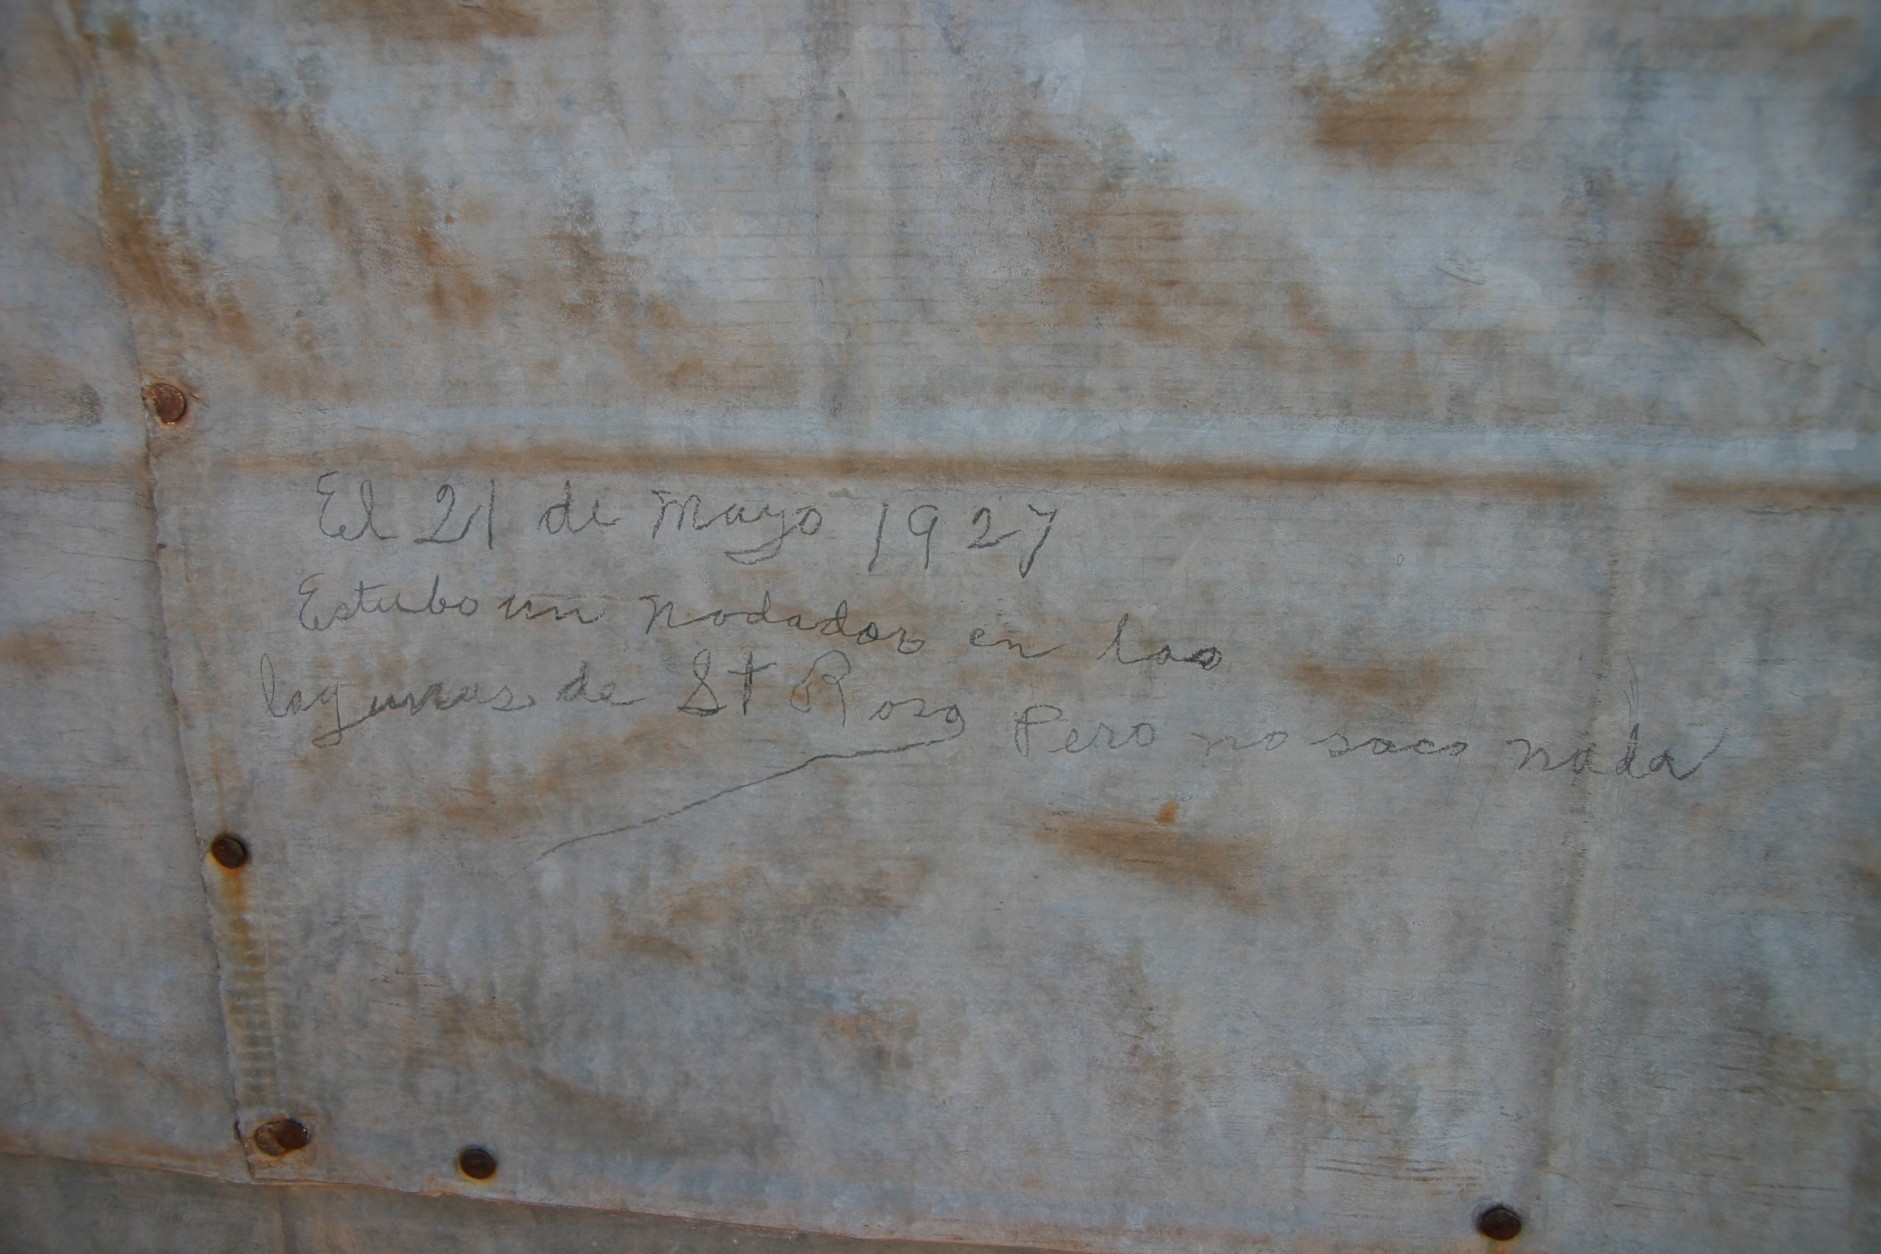 Writing on the wall of the Hawkins building in Cuervo, New Mexico.